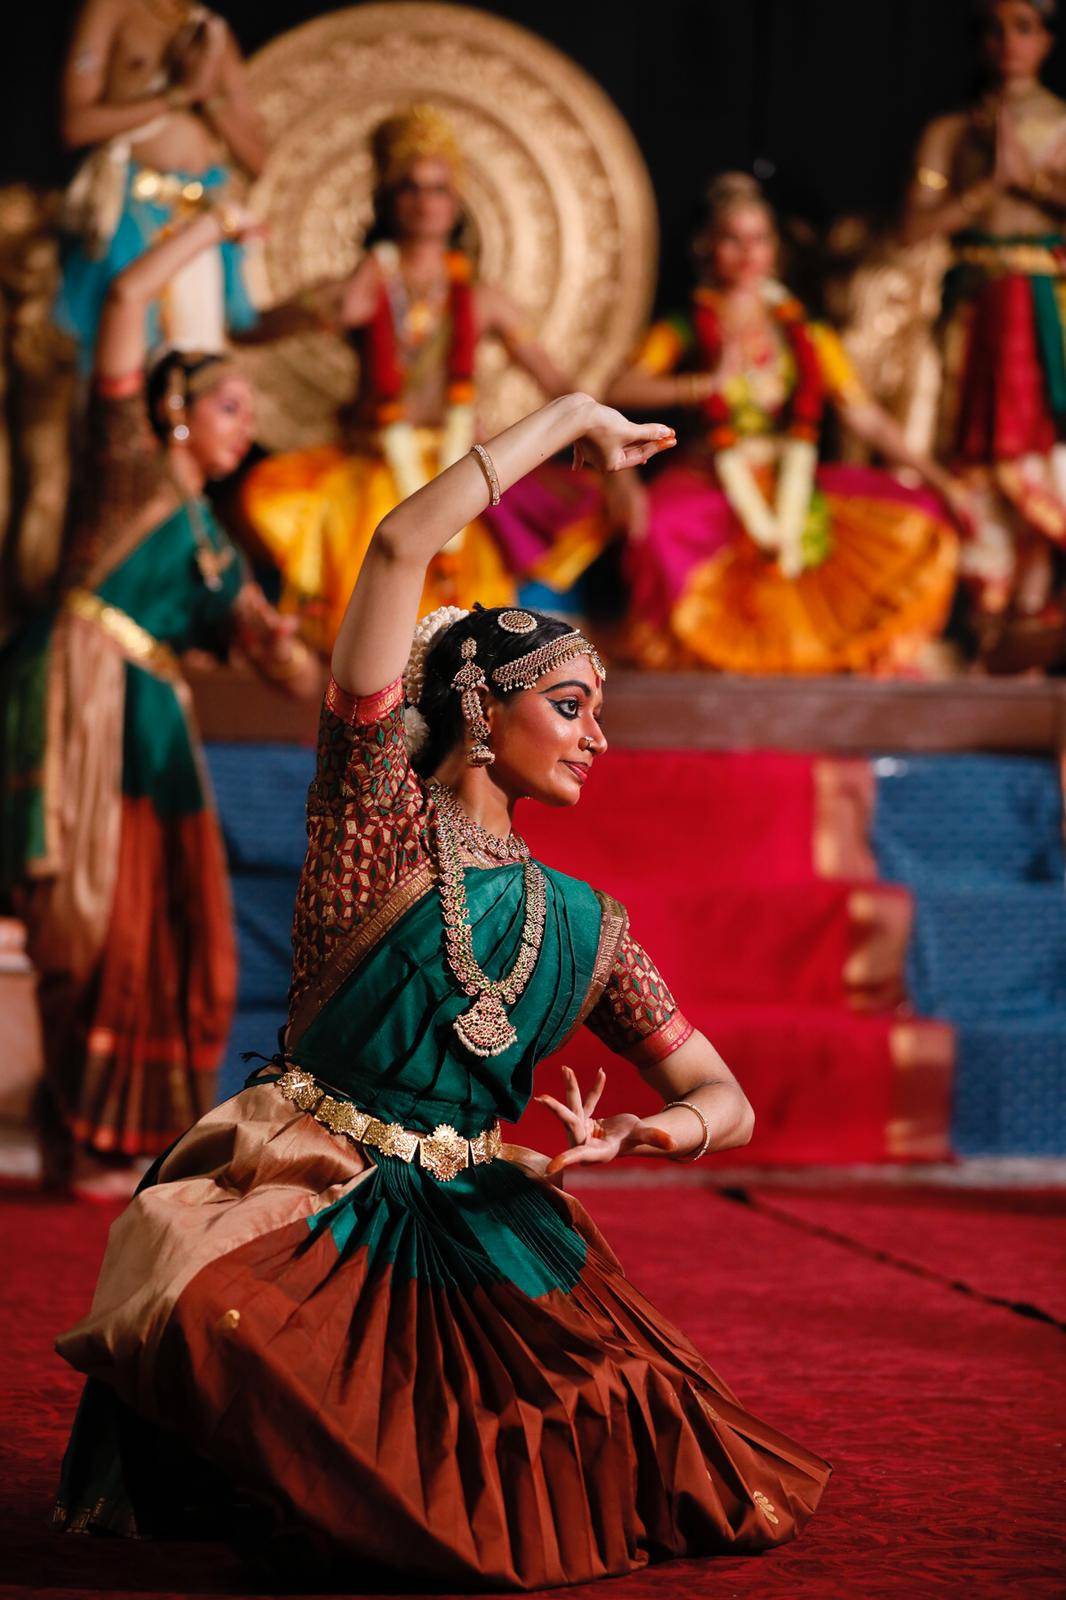 THE INDIAN HERITAGE CENTRE’S FIRST DIGITAL CULTUREFEST CELEBRATES THE BEAUTY AND UNIFYING VALUES OF INDIAN ARTS AND HERITAGE